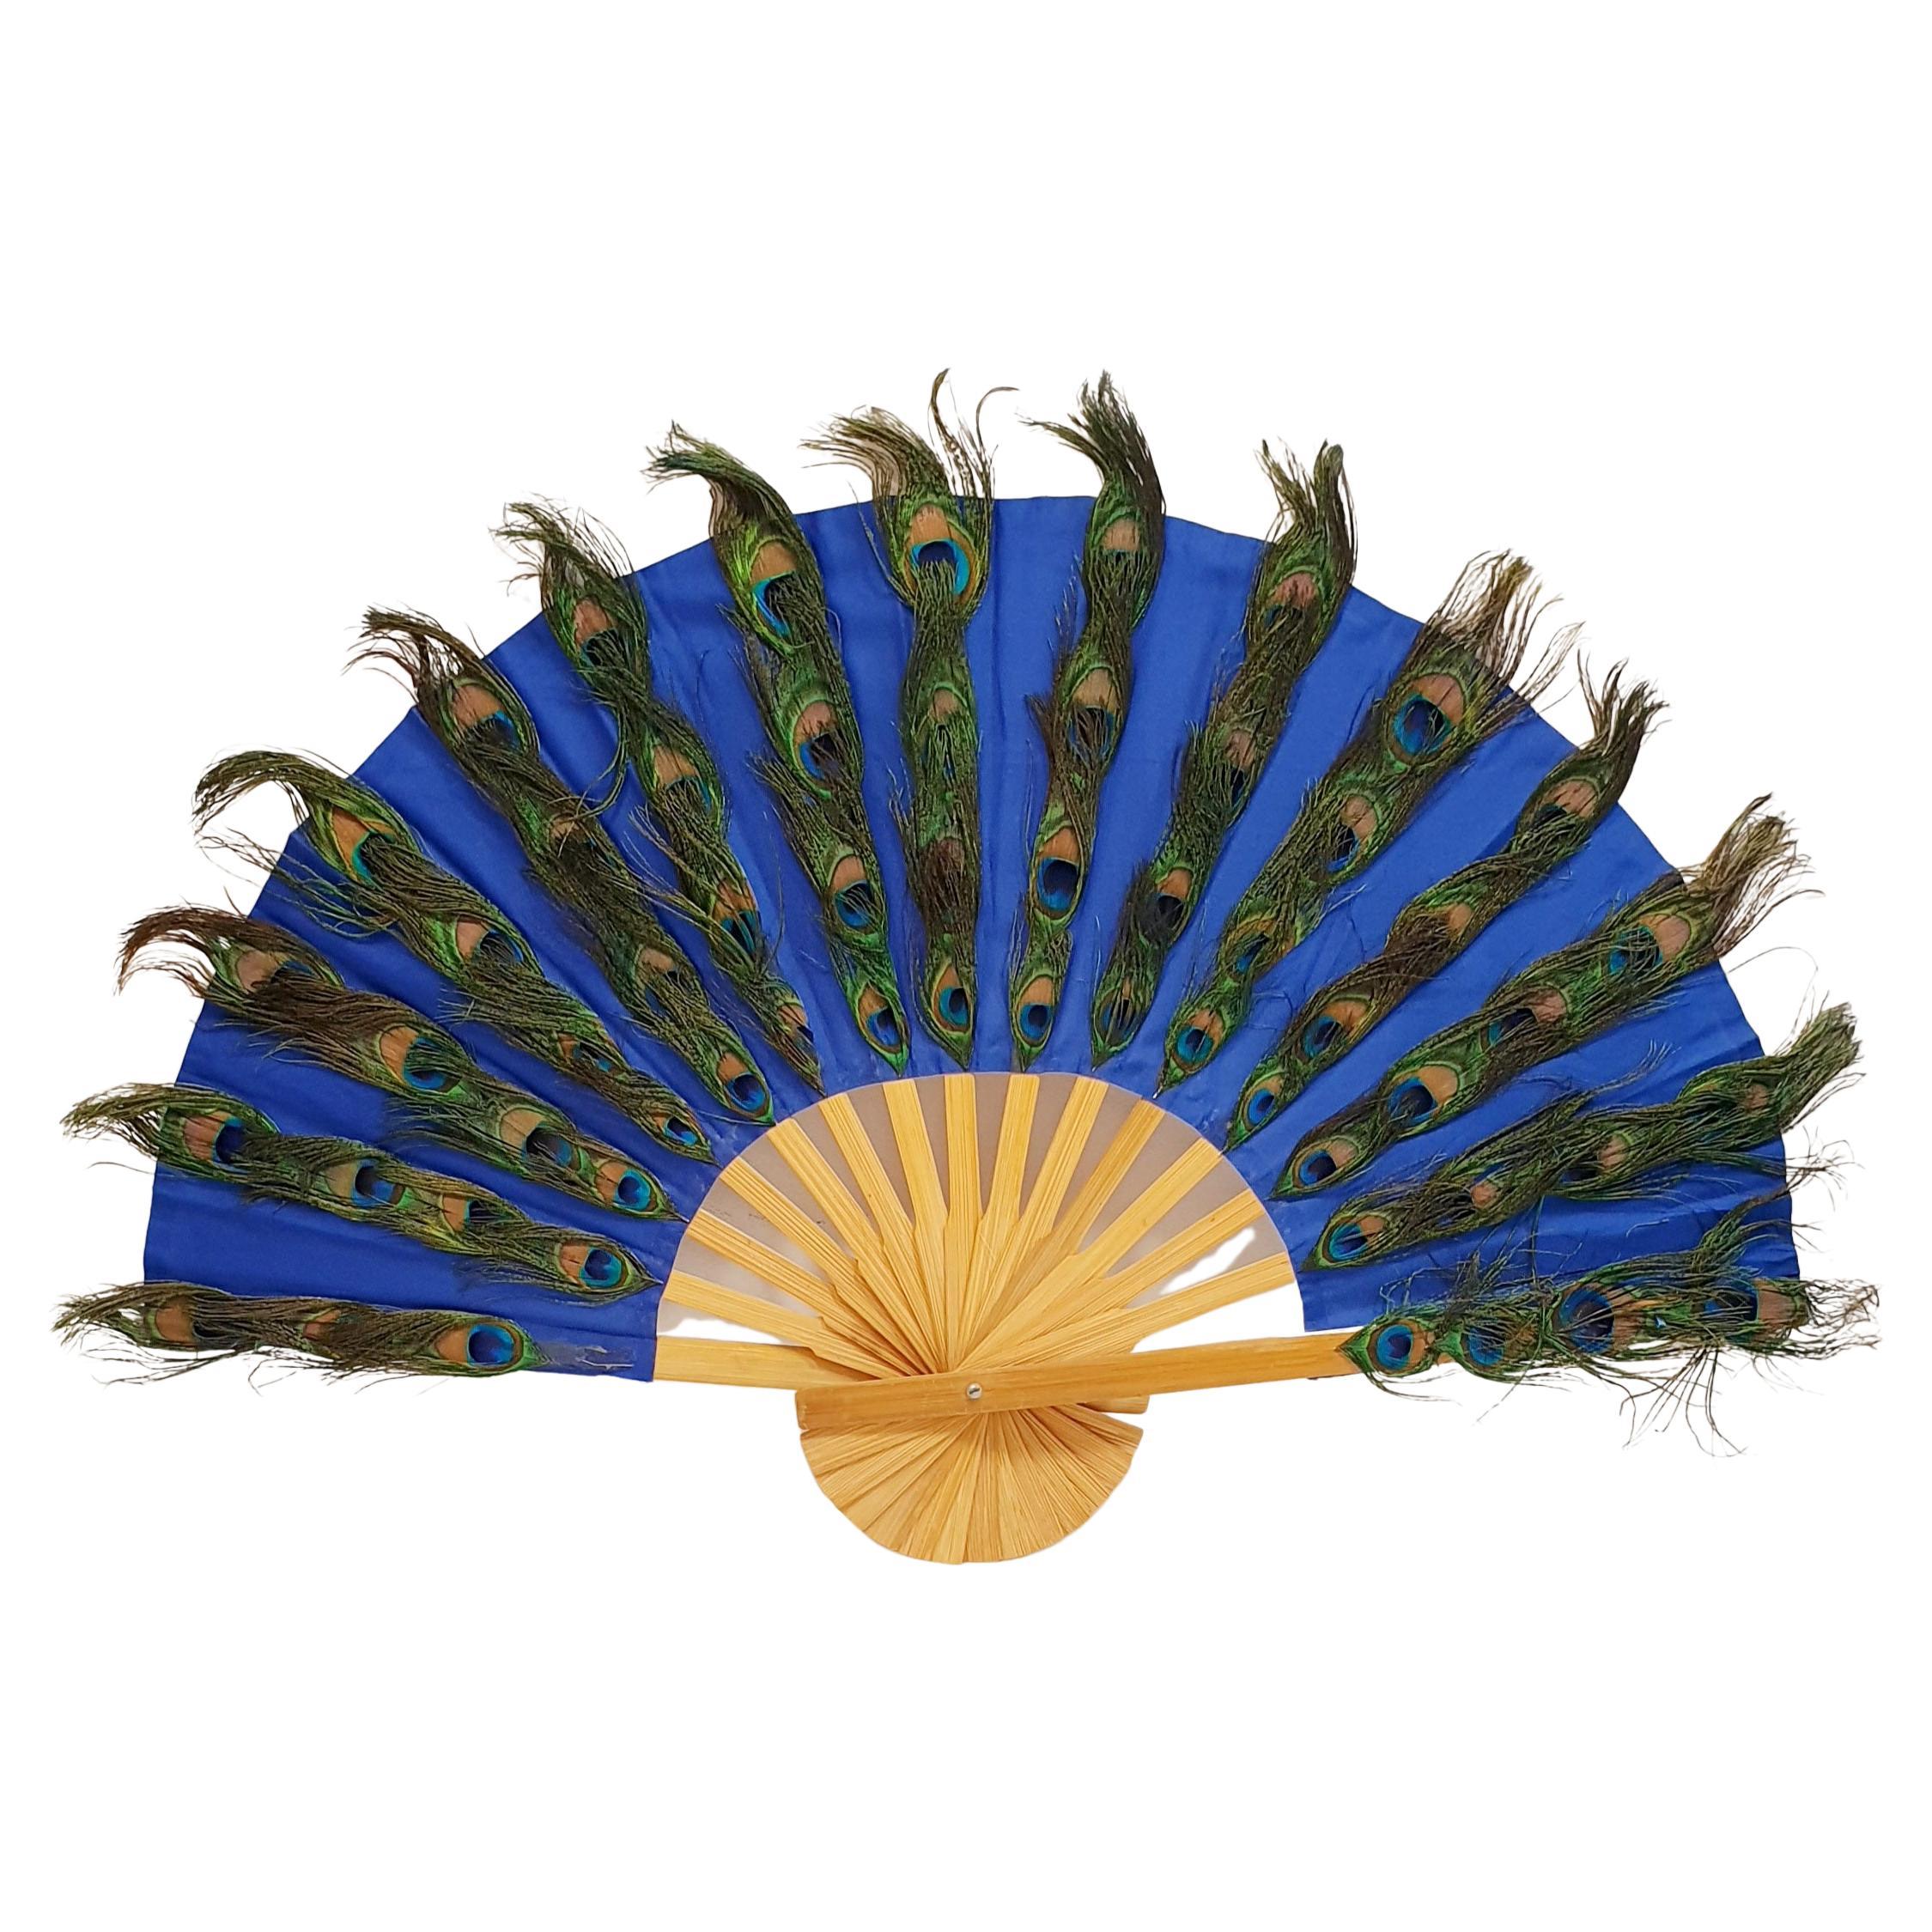 Large Peacok Feathers Fan in natural barnished pine wood  